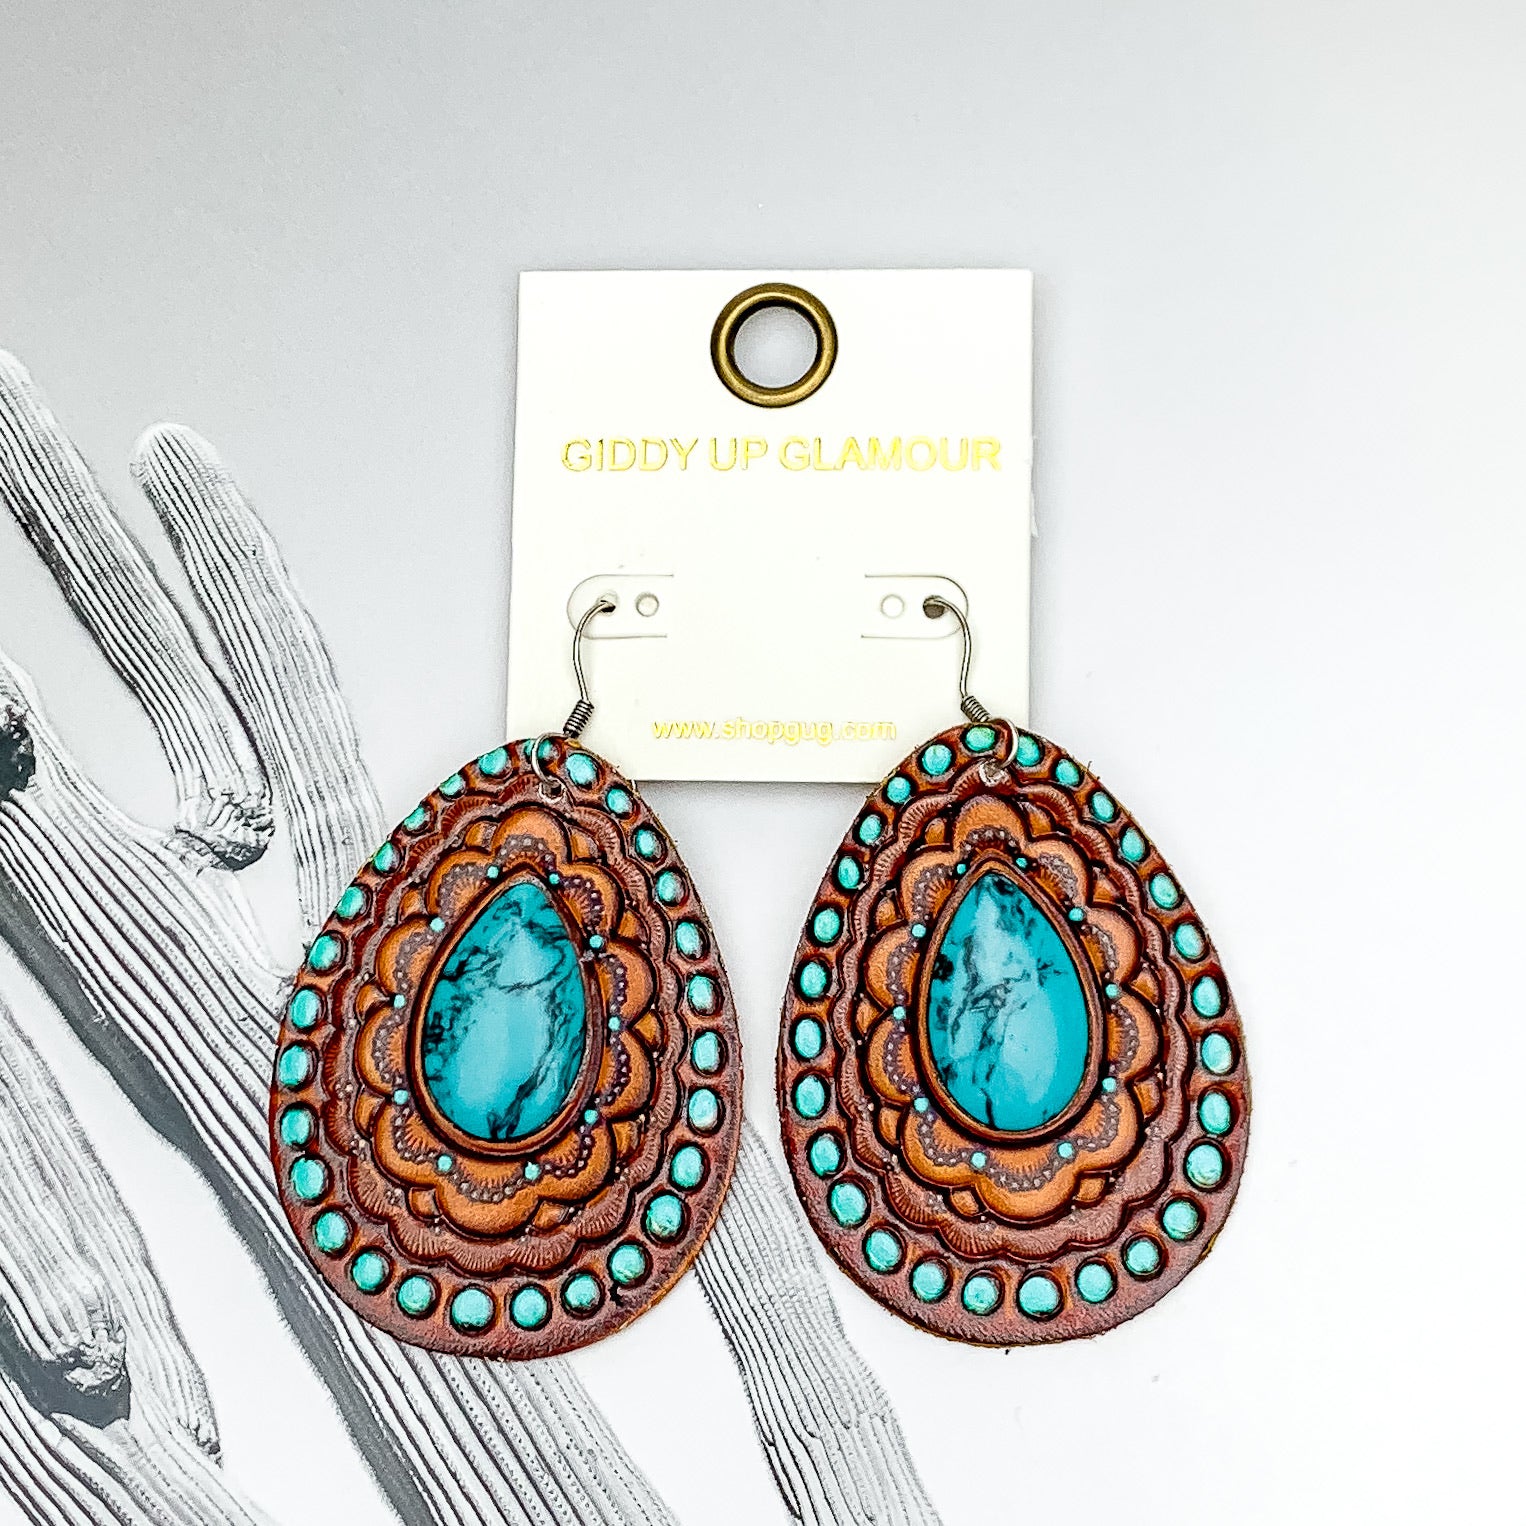 Teardrop earrings with a silver fish hook. These earrings have a faux leather tooled print with a center turquoise stone. These earrings are pictured on a white and black background. 